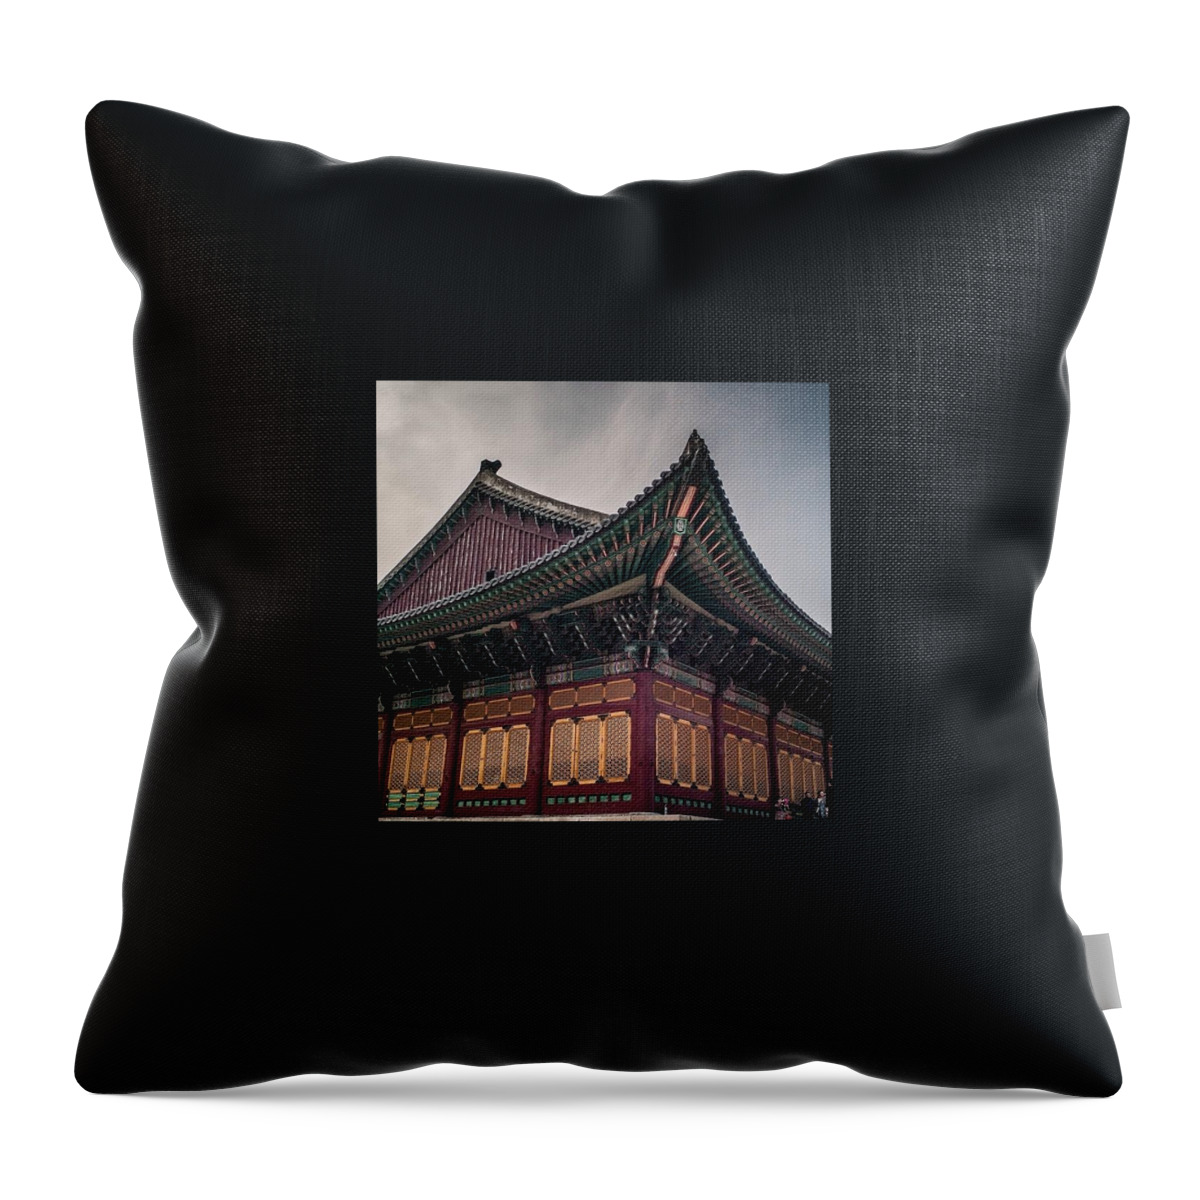 Ywam Throw Pillow featuring the photograph So Ornate - Love This! by Aleck Cartwright